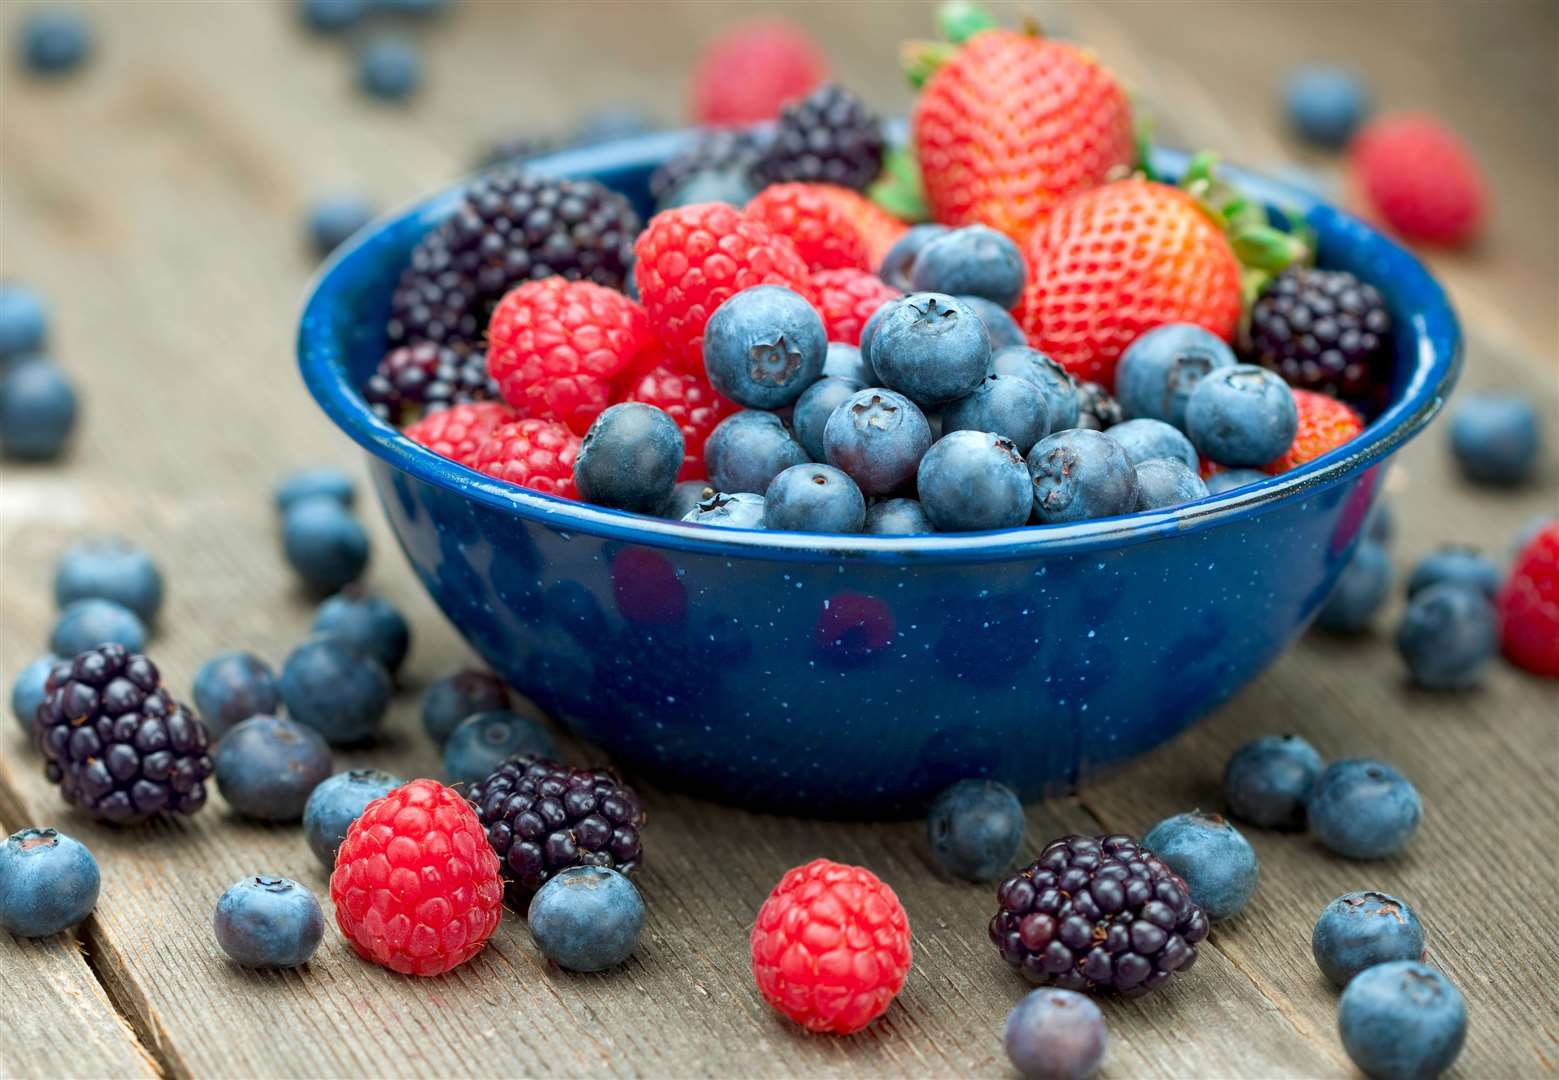 Berries have the lowest sugar content among fruits